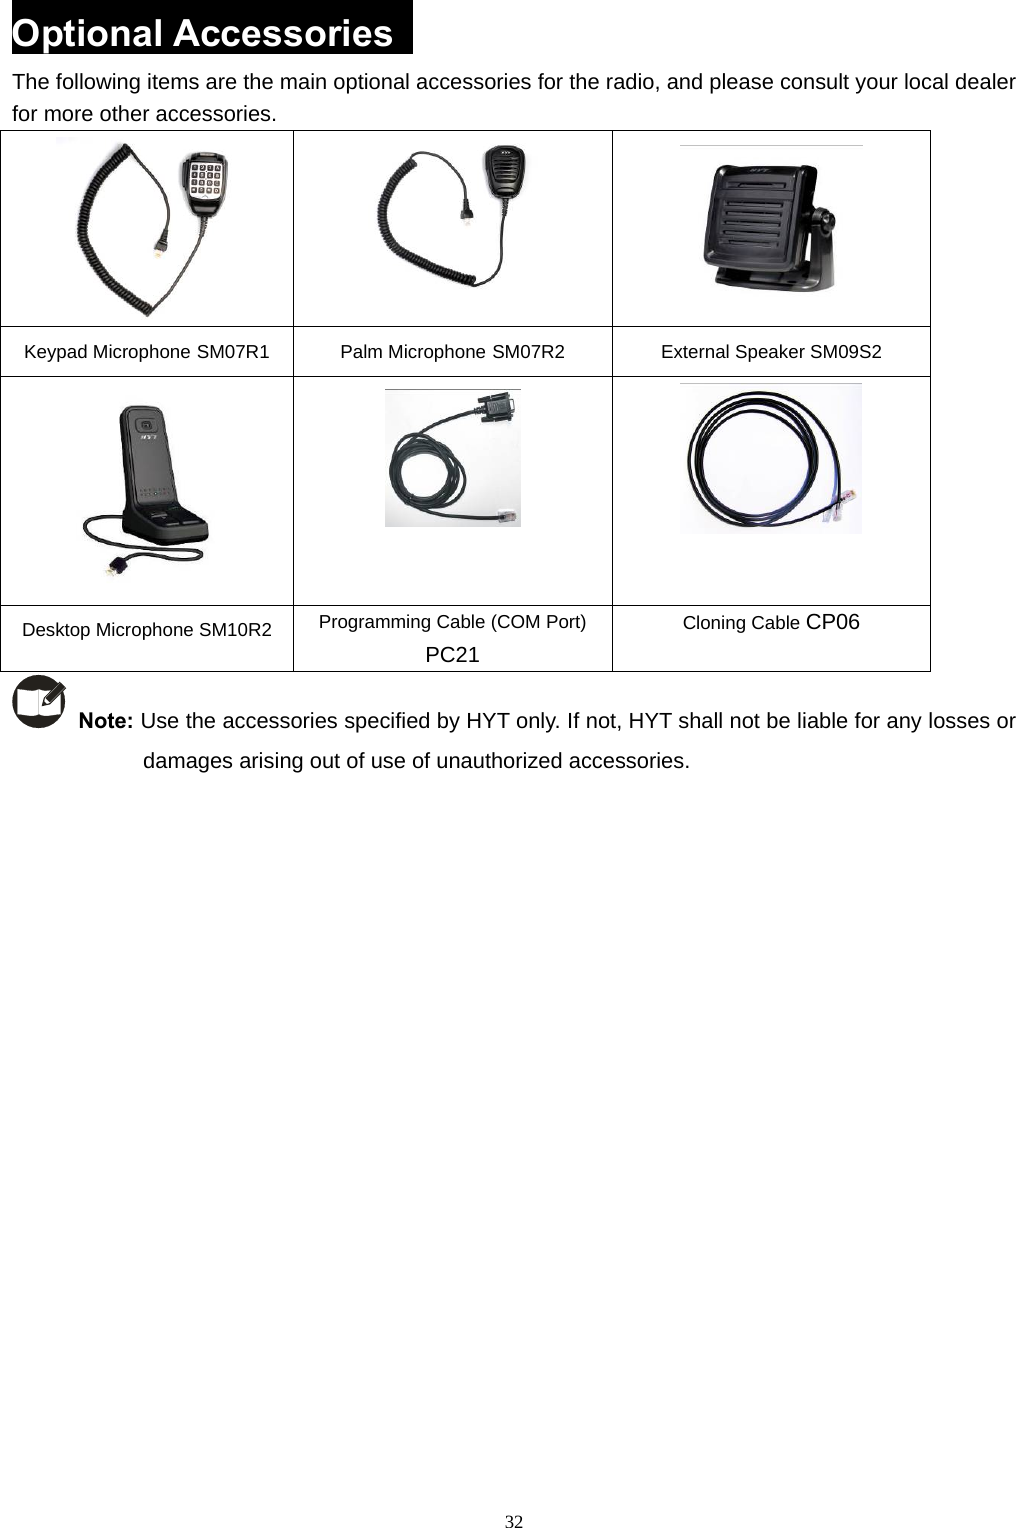  32Optional Accessories   The following items are the main optional accessories for the radio, and please consult your local dealer for more other accessories.      Keypad Microphone SM07R1 Palm Microphone SM07R2 External Speaker SM09S2    Desktop Microphone SM10R2 Programming Cable (COM Port) PC21 Cloning Cable CP06  Note: Use the accessories specified by HYT only. If not, HYT shall not be liable for any losses or damages arising out of use of unauthorized accessories.   